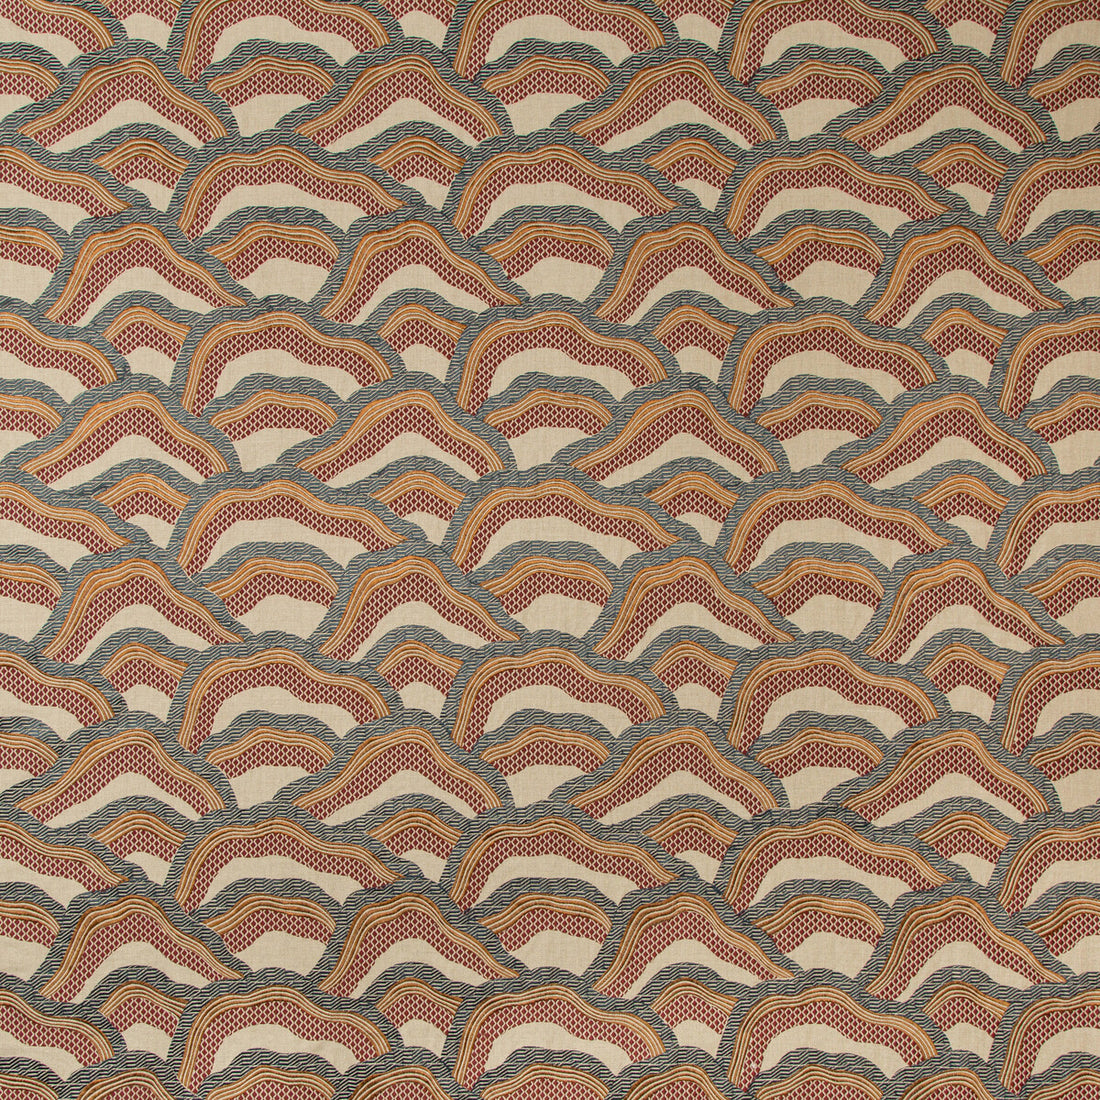 Les Rizieres Emb fabric in rust/grey color - pattern 8017127.2411.0 - by Brunschwig &amp; Fils in the Les Ensembliers II collection